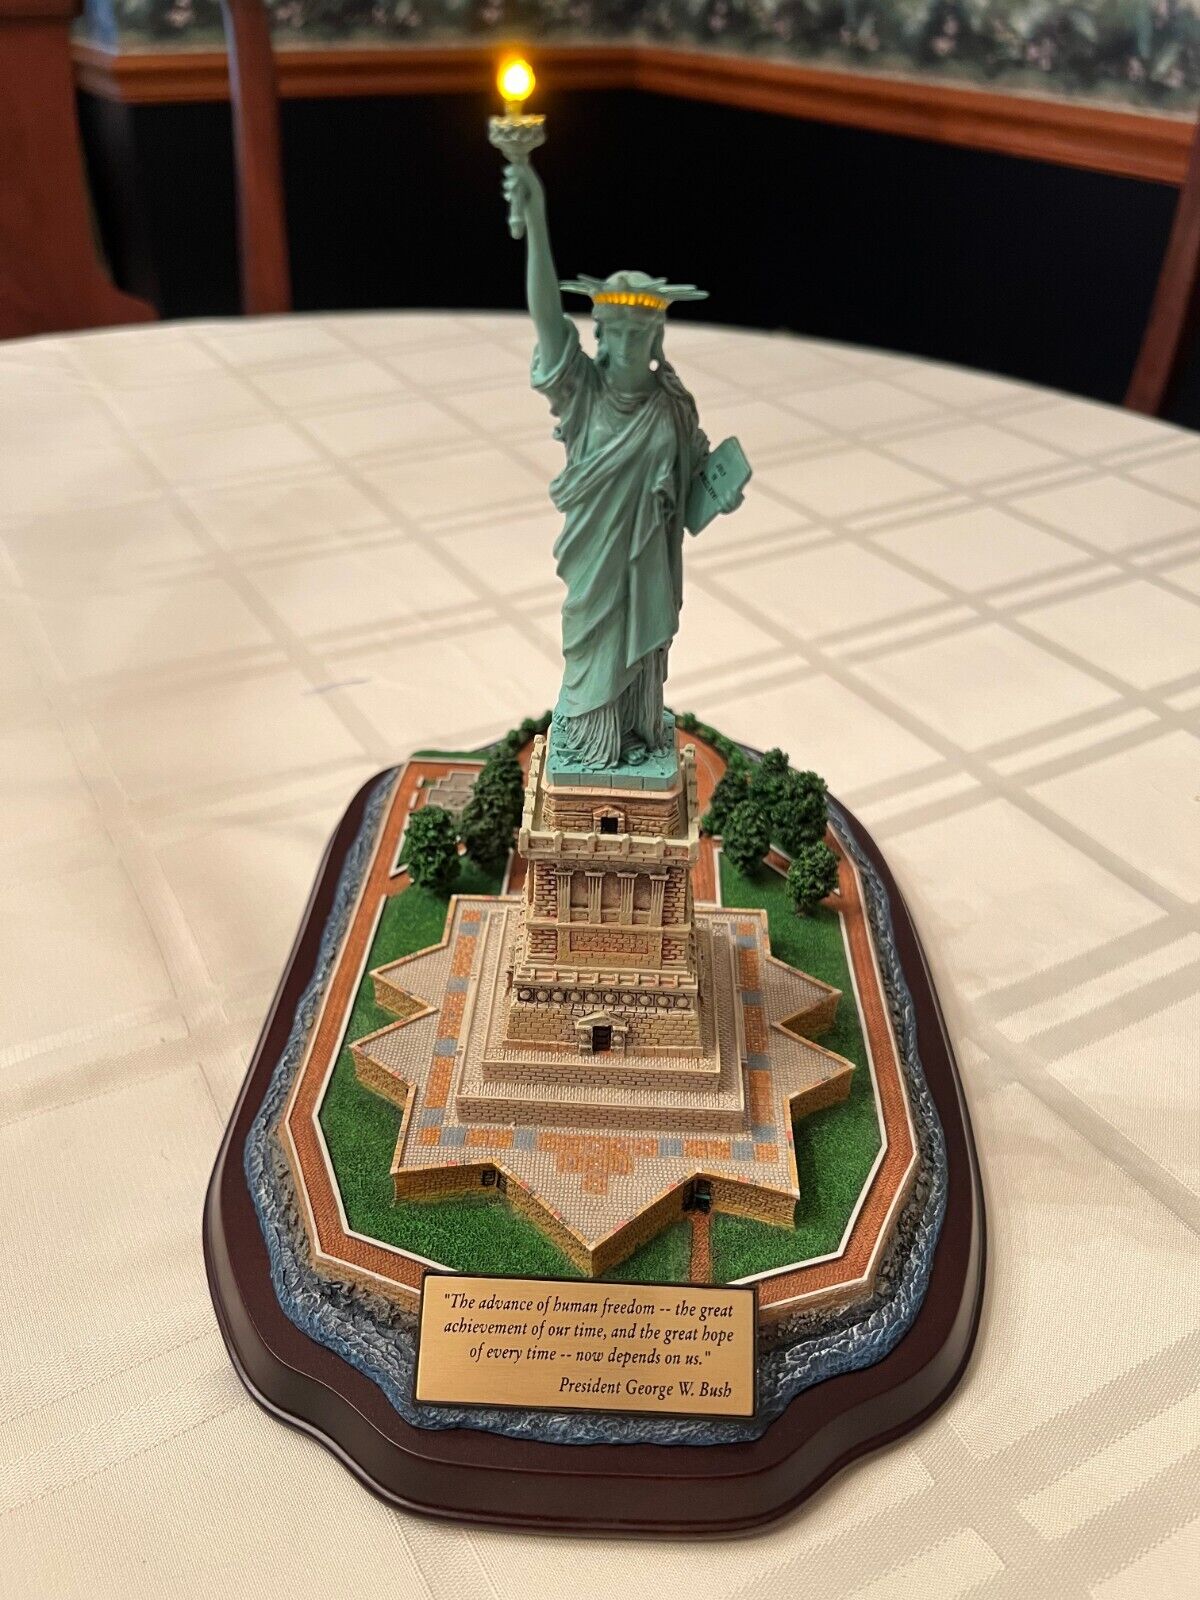 Danbury Mint Lighted Commemorative Statue of Liberty With American Flag -1 Owner